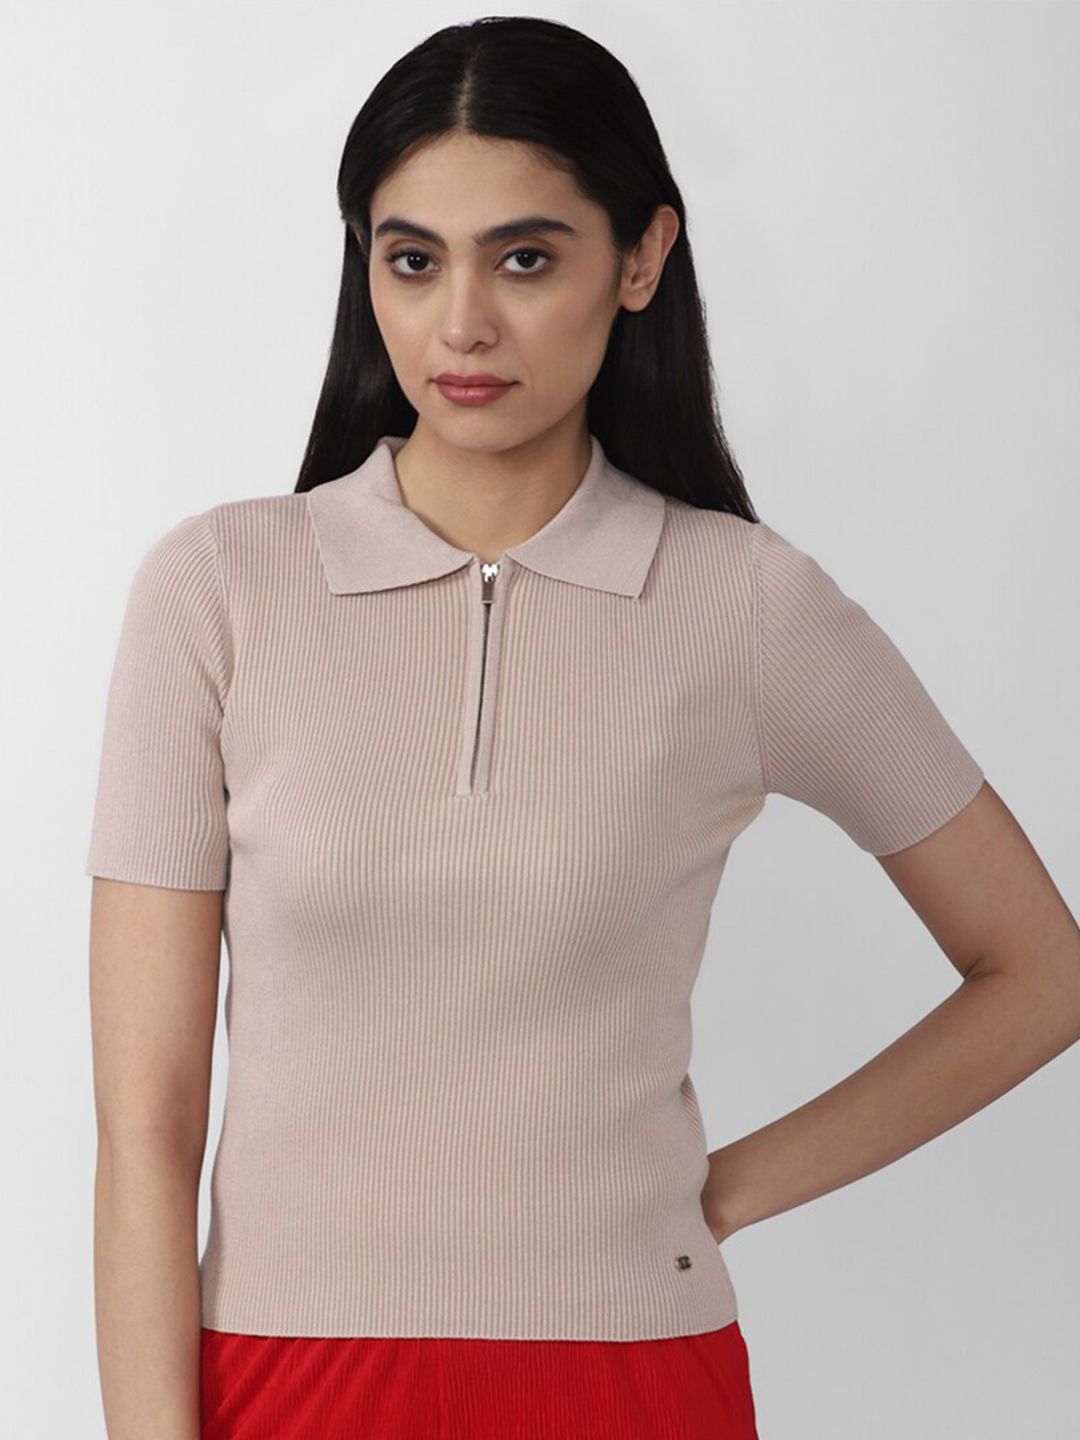 Van Heusen Woman Pink Ribbed Pure Cotton Top Price in India